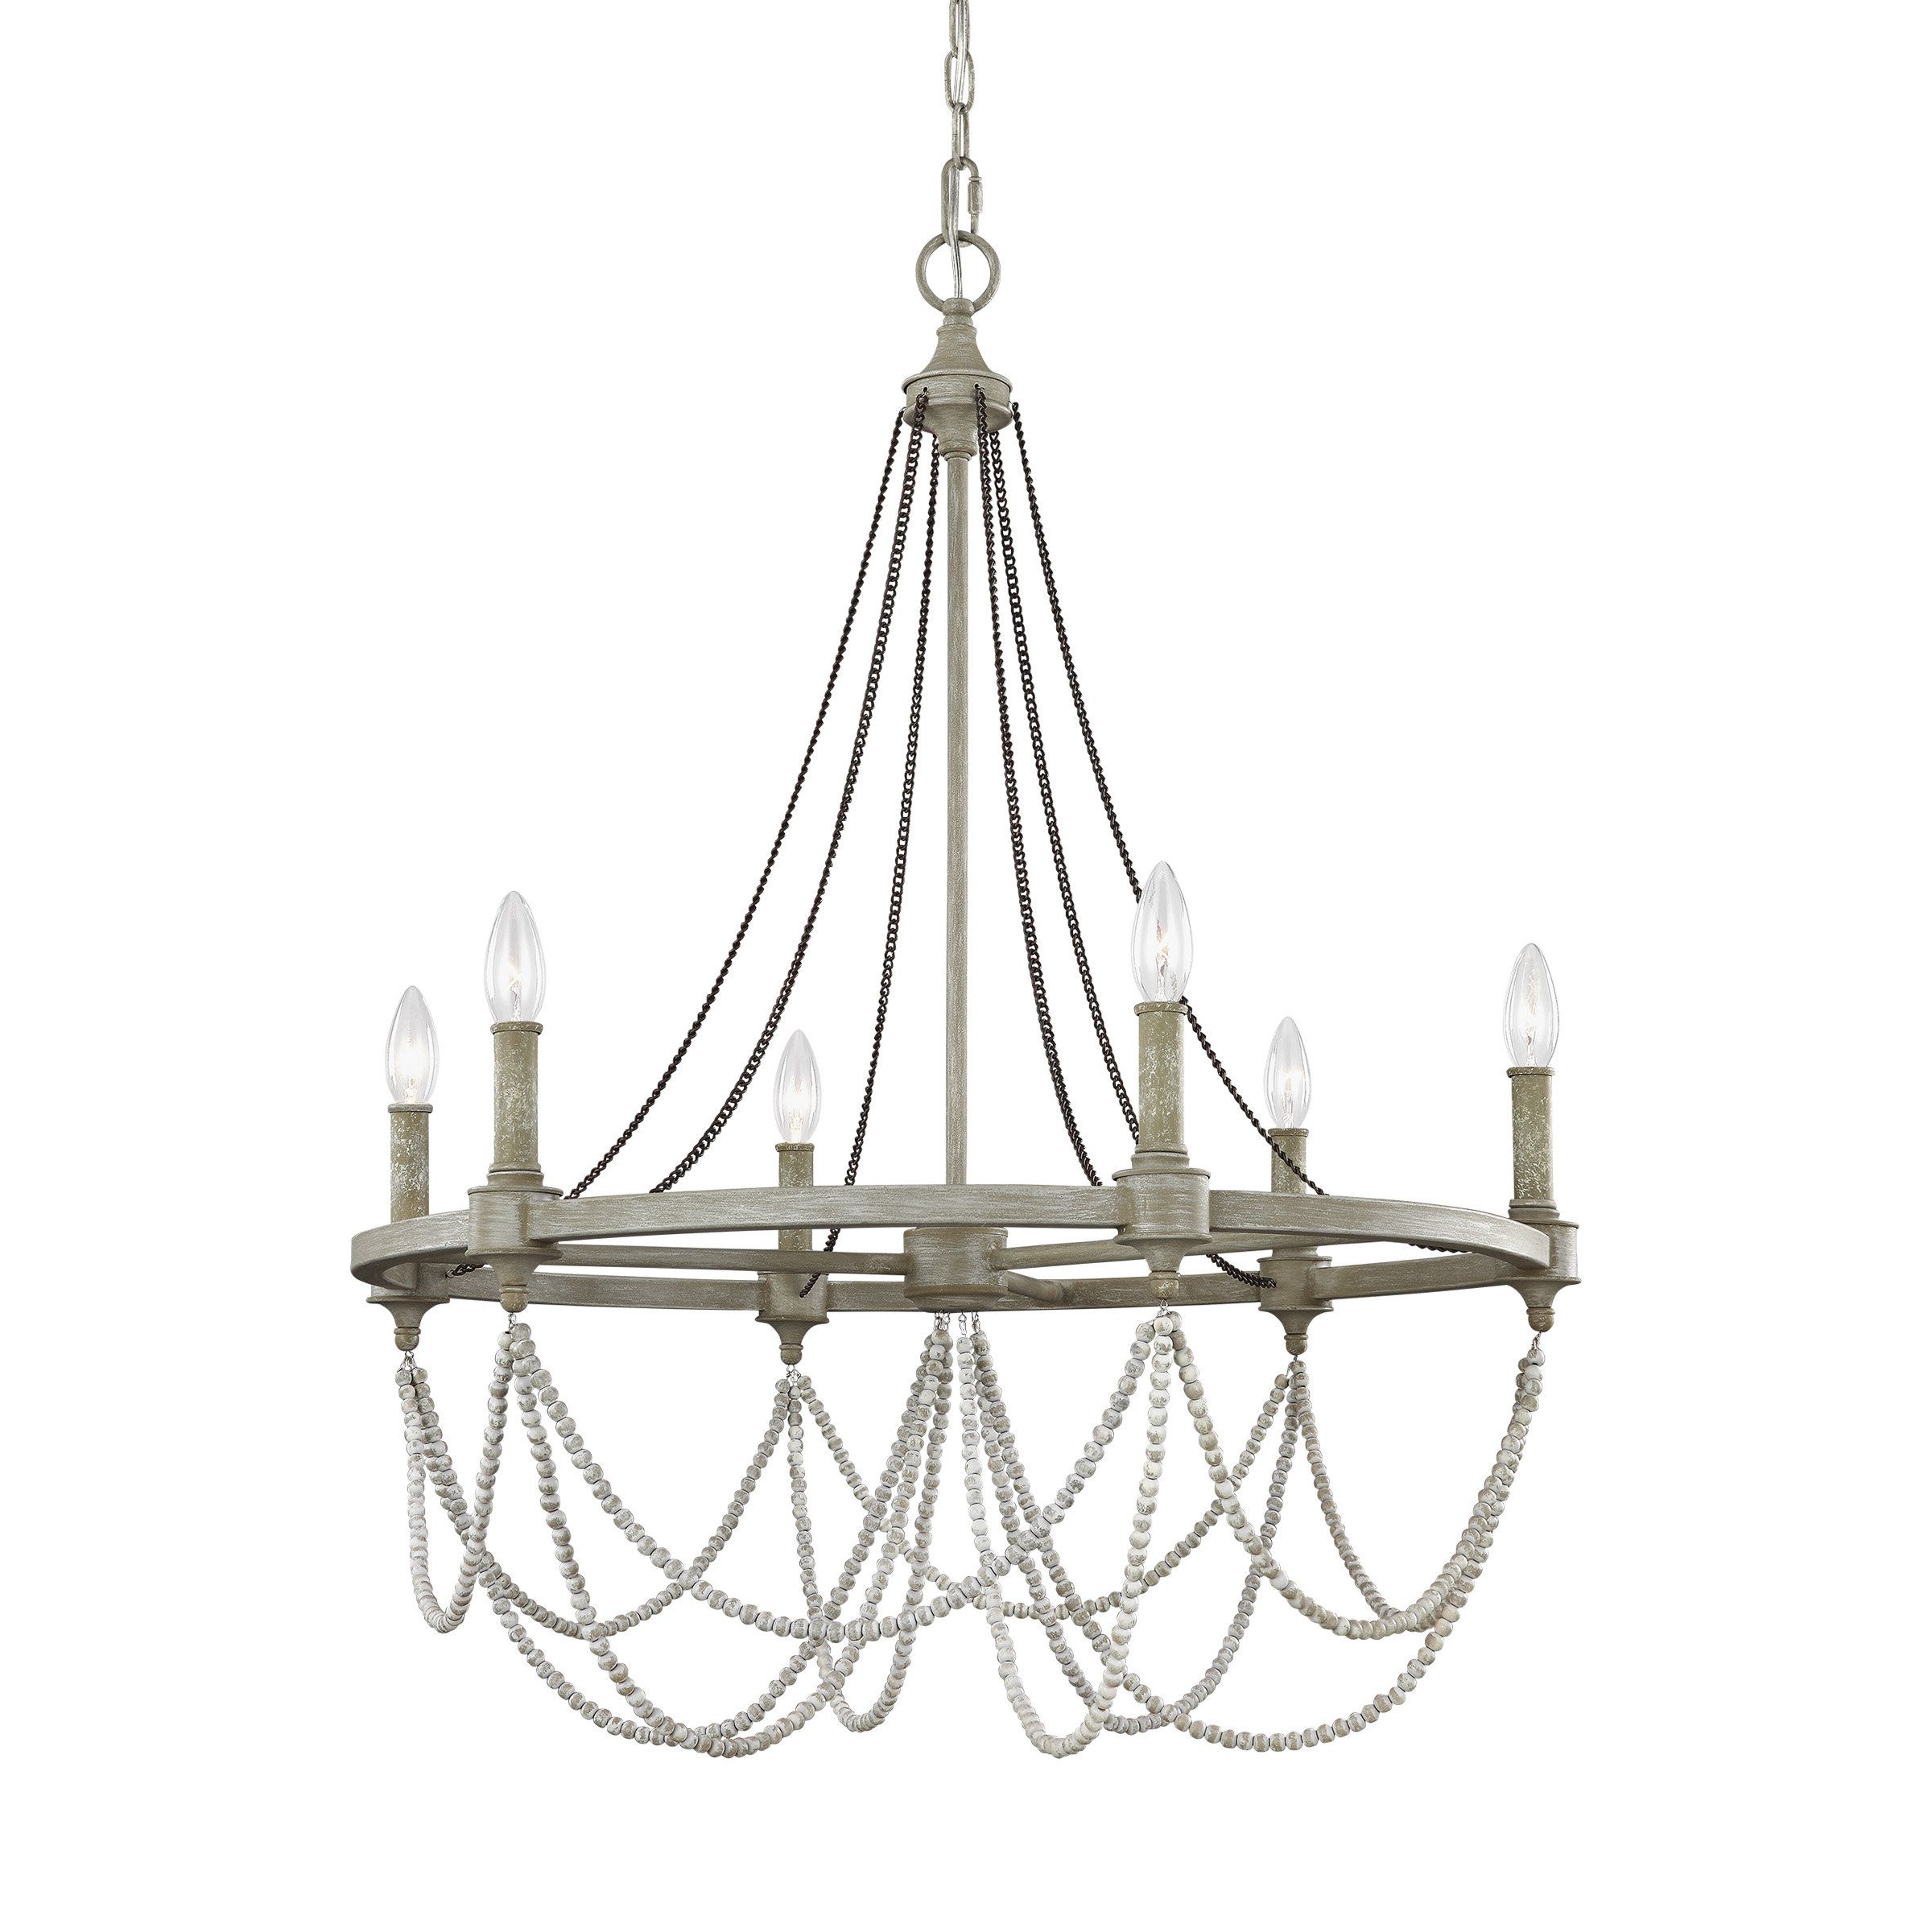 Preferred Watford 6 Light Candle Style Chandeliers For Fitzgibbon 6 Light Candle Style Chandelier (View 6 of 25)